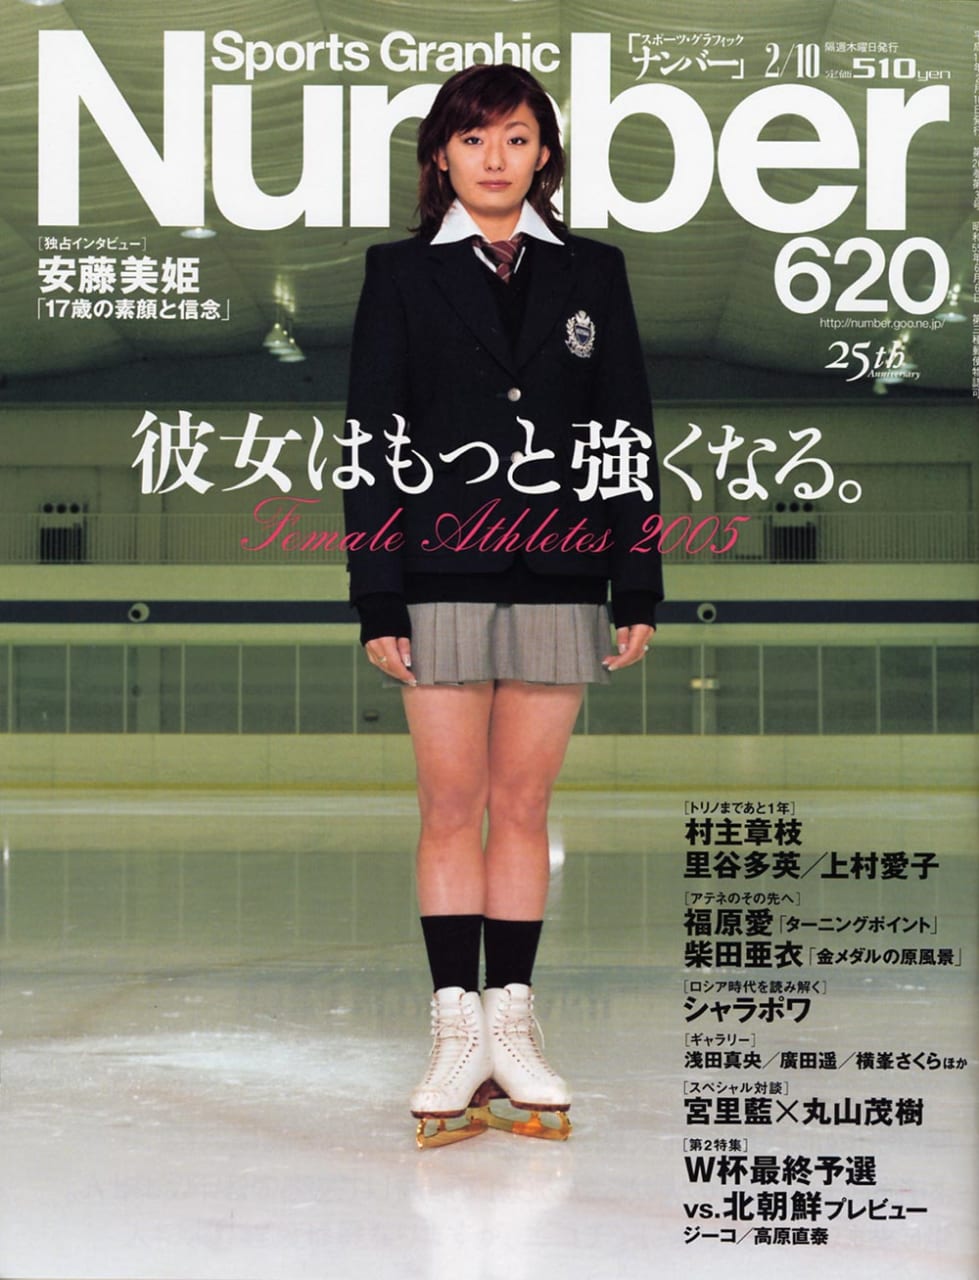 Sports Graphic Number 620号
2005年1月27日発売
表紙撮影：岩根愛